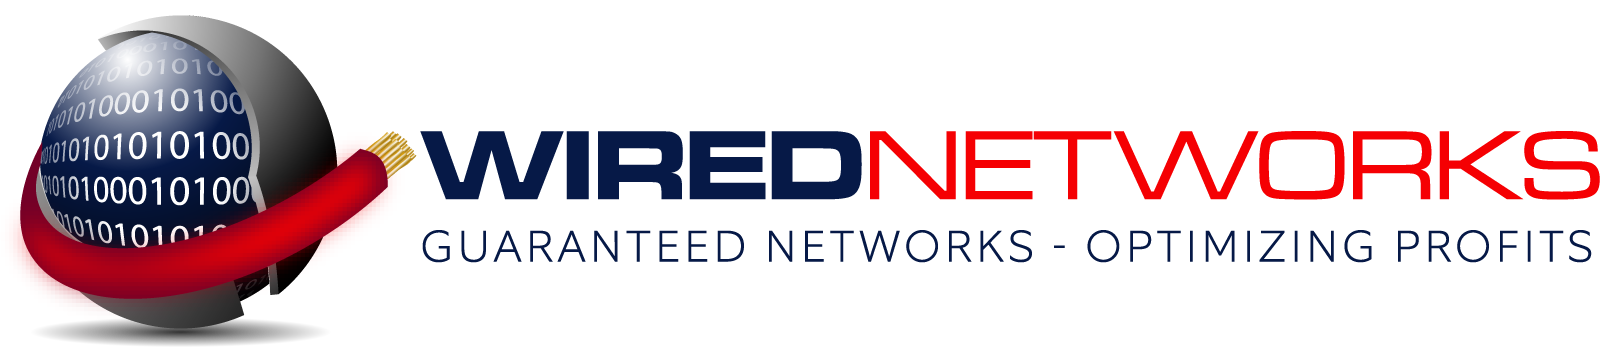 Wired Networks logo